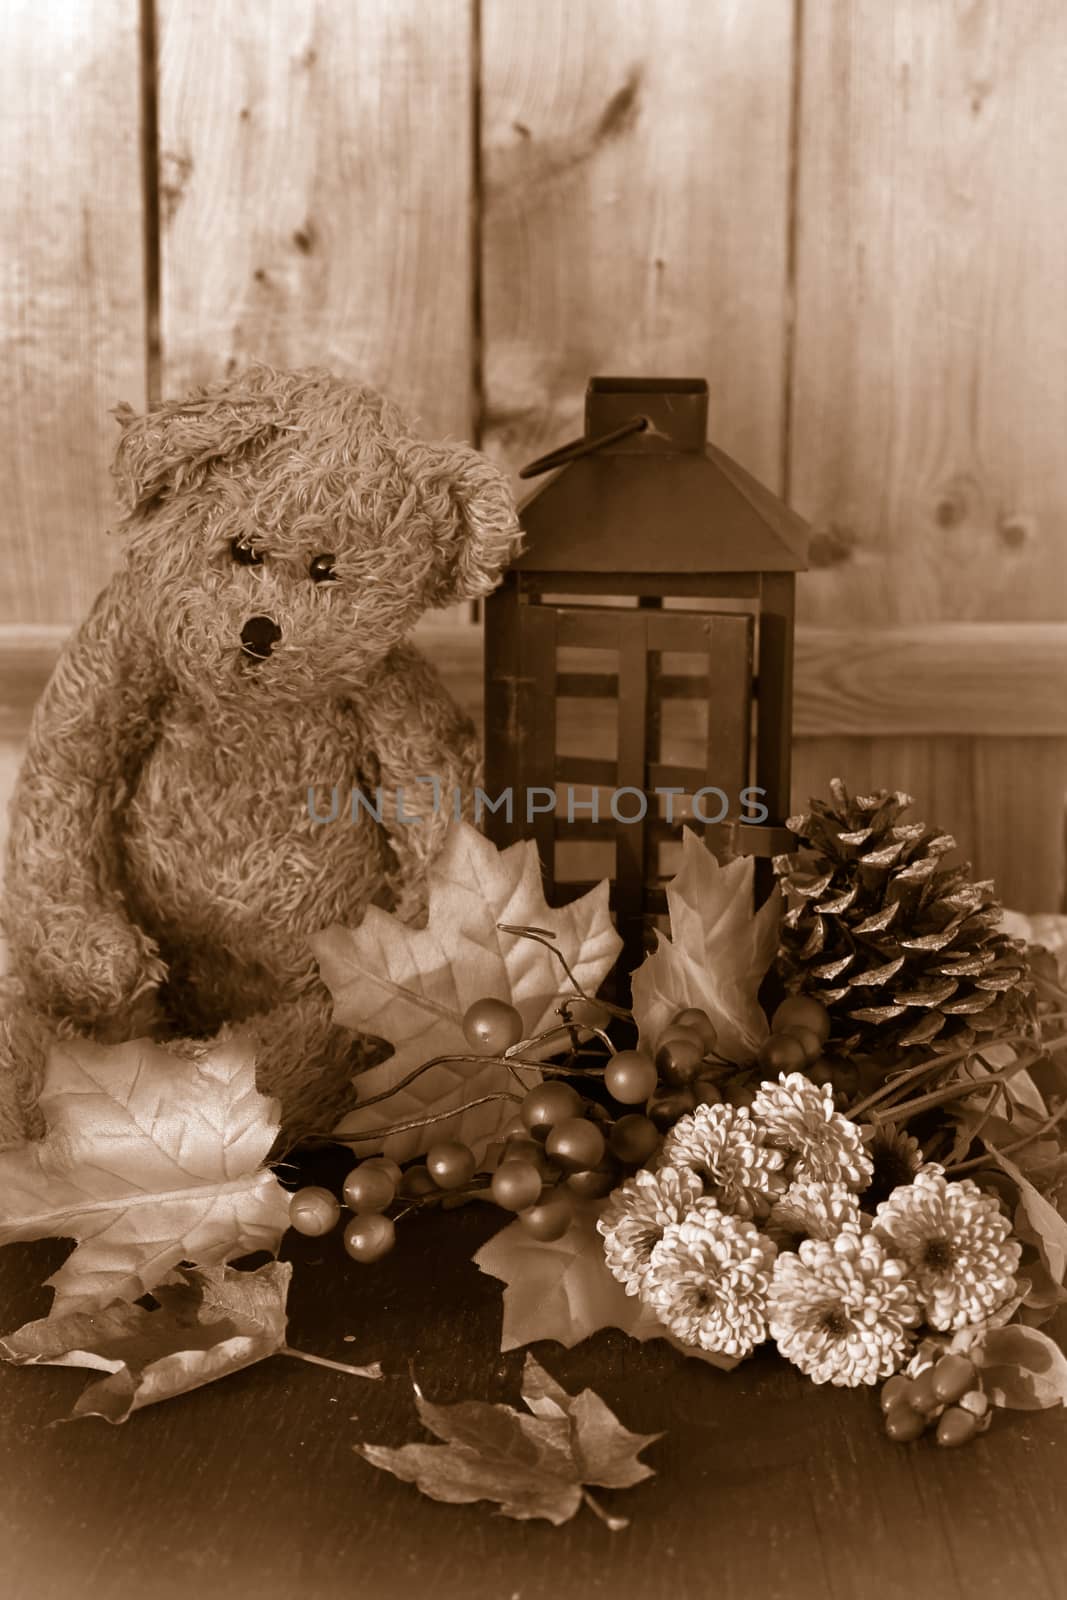 Fall or autumn flowers, pine cone and berries with sepia leaves, teddy bear and lantern on a vintage wooden background with shallow depth of field